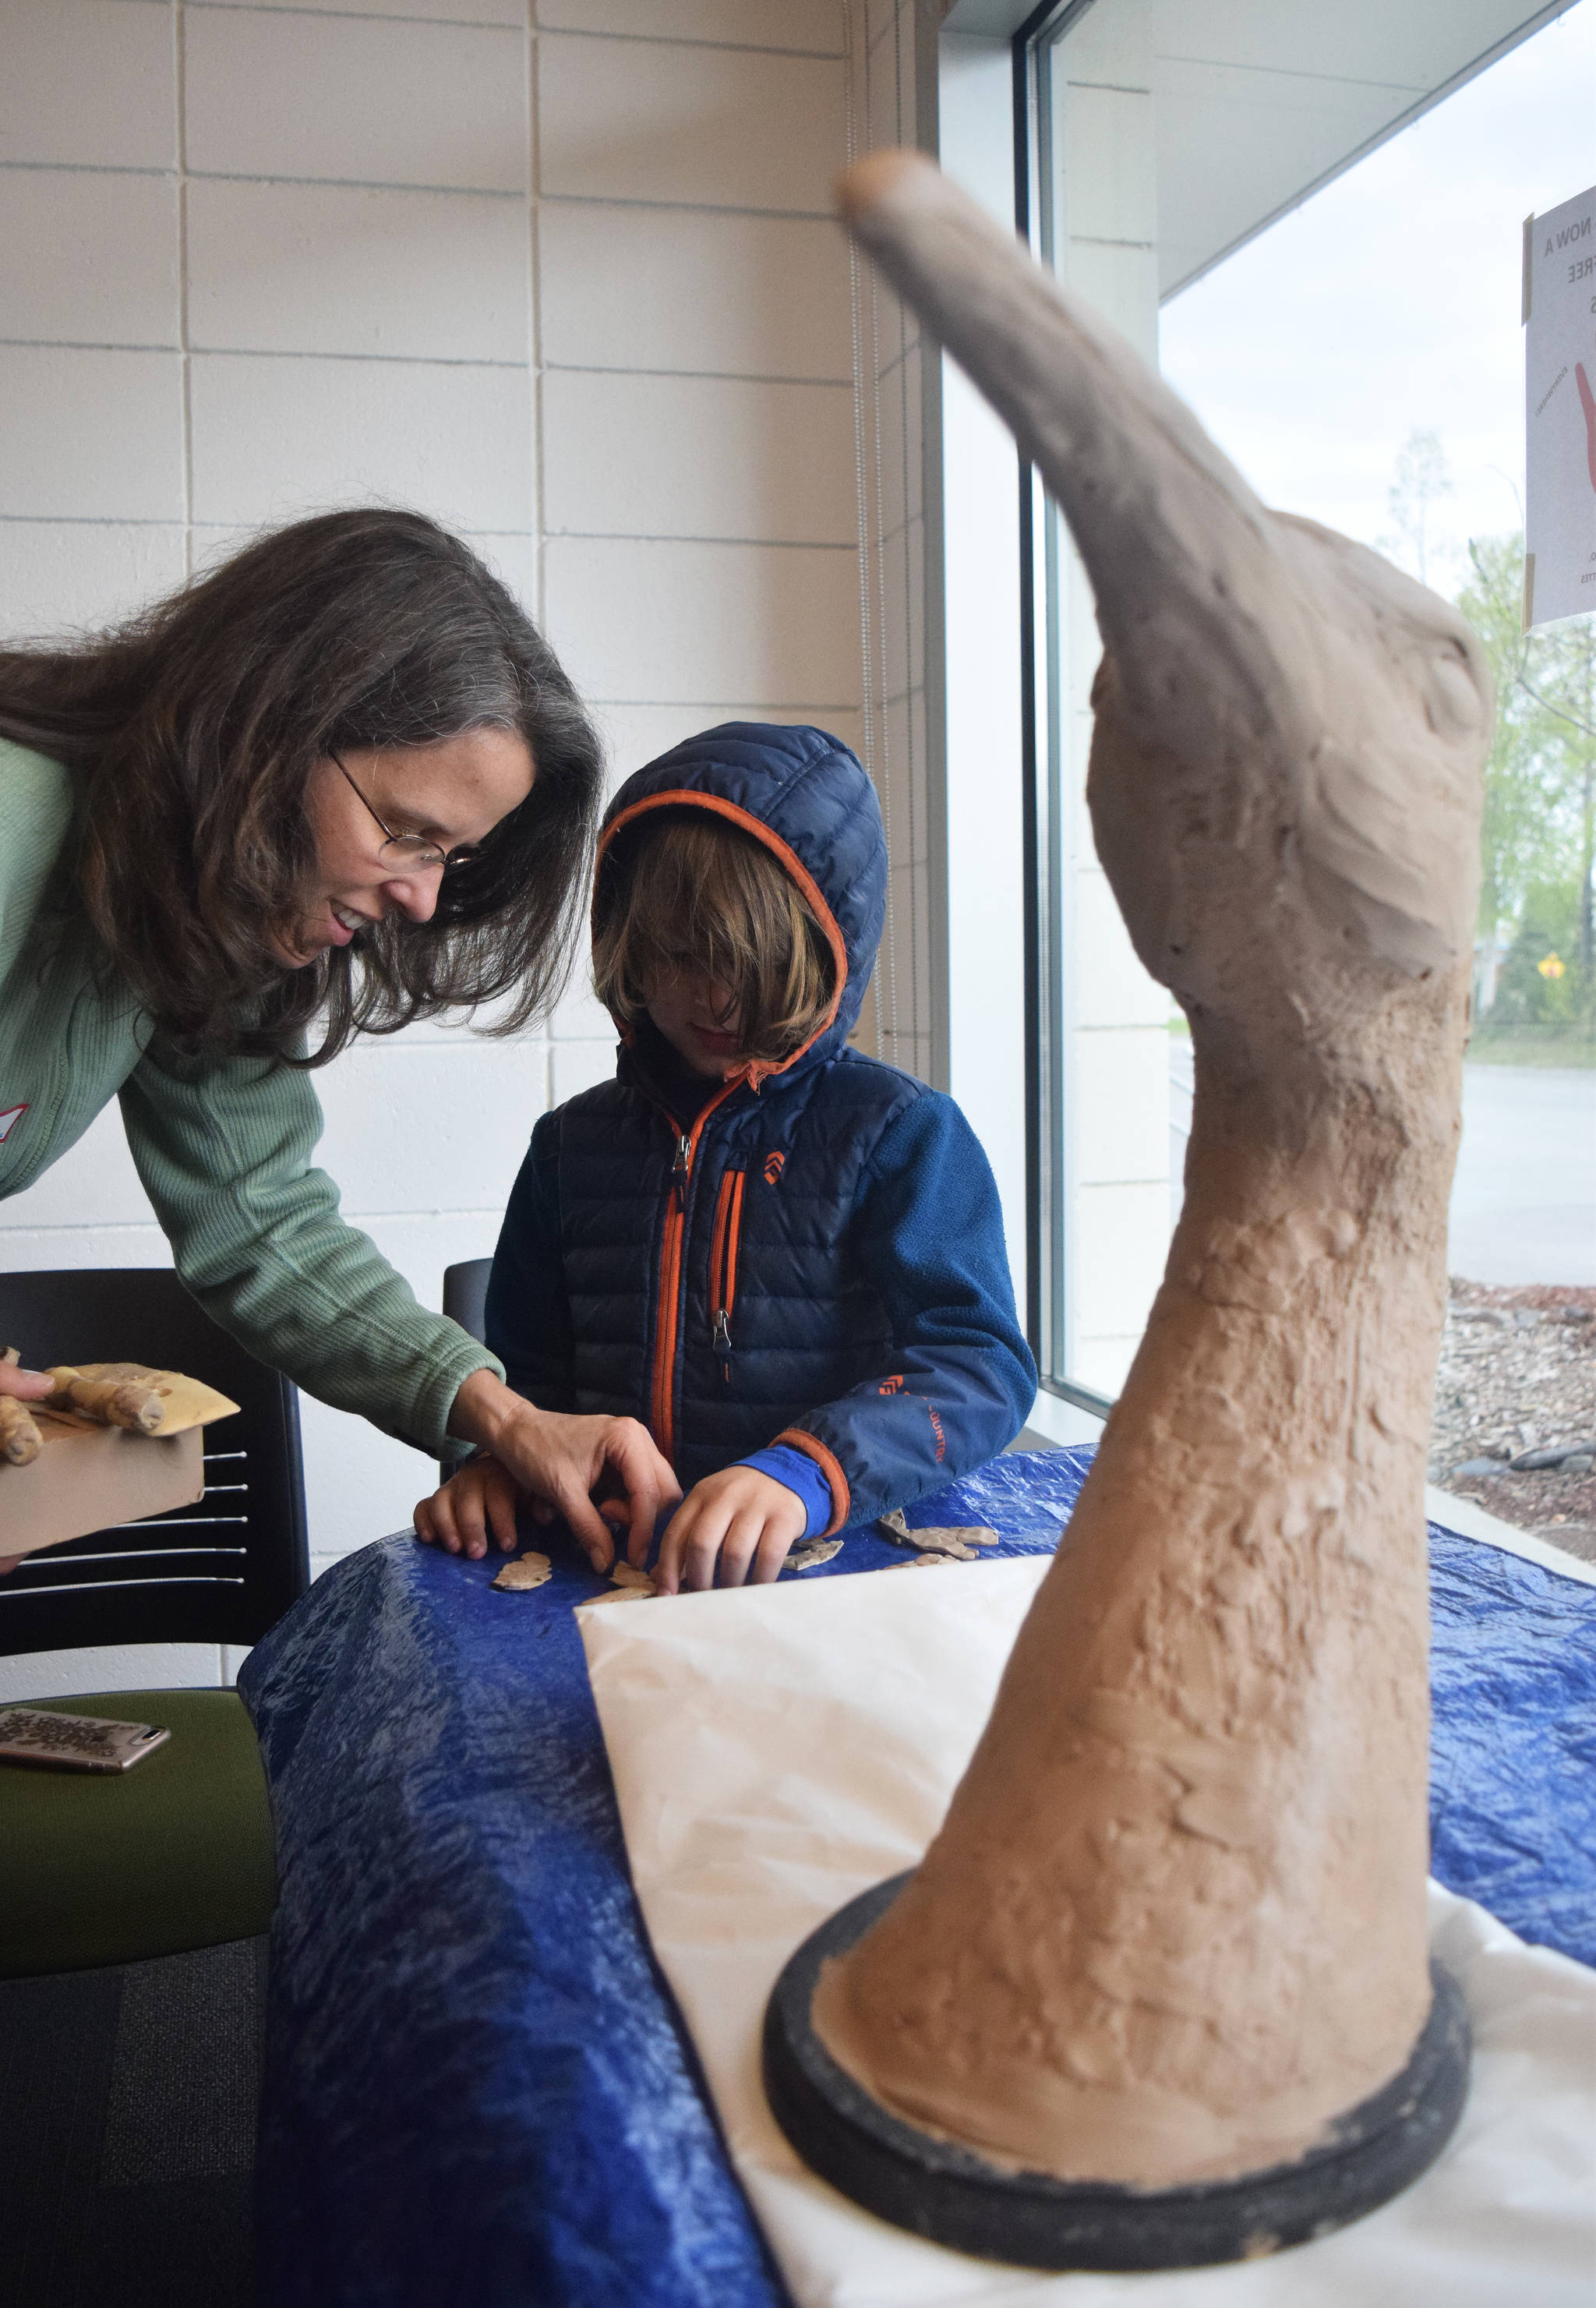 Local artist Christina Demetro helps a young artist create new pieces of clay that will be added to a sculpture of a 6-foot tall sandhill crane on Saturday morning at the Kenai Community Library. The sculpture will ultimately be displayed at the Shimai Toshi Garden Trails, a Japanese Garden that will be the first of its kind in Alaska. The clay sculpture received a local flair as interested artists could choose to add their own style to the statue, which sat in several pieces at the library. The statue will eventually be pieced together and bronzed. (Photo by Joey Klecka/Peninsula Clarion)